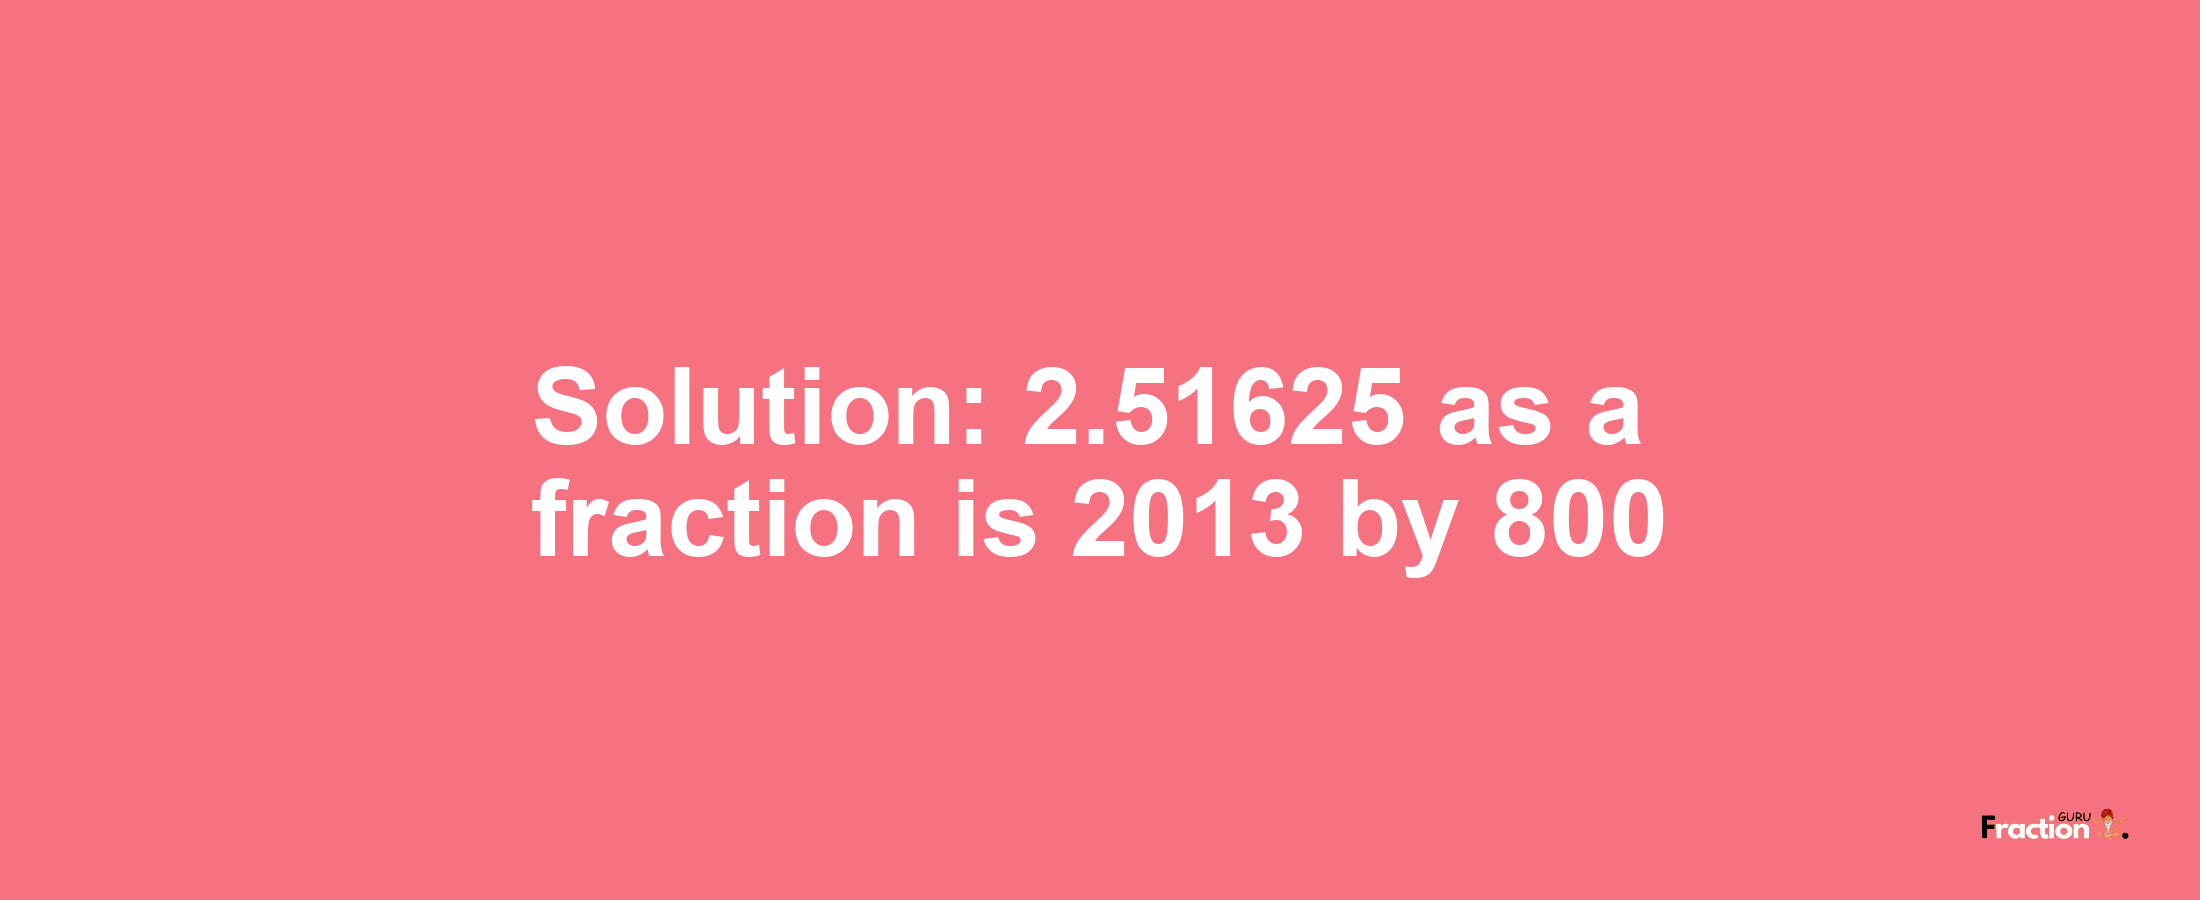 Solution:2.51625 as a fraction is 2013/800